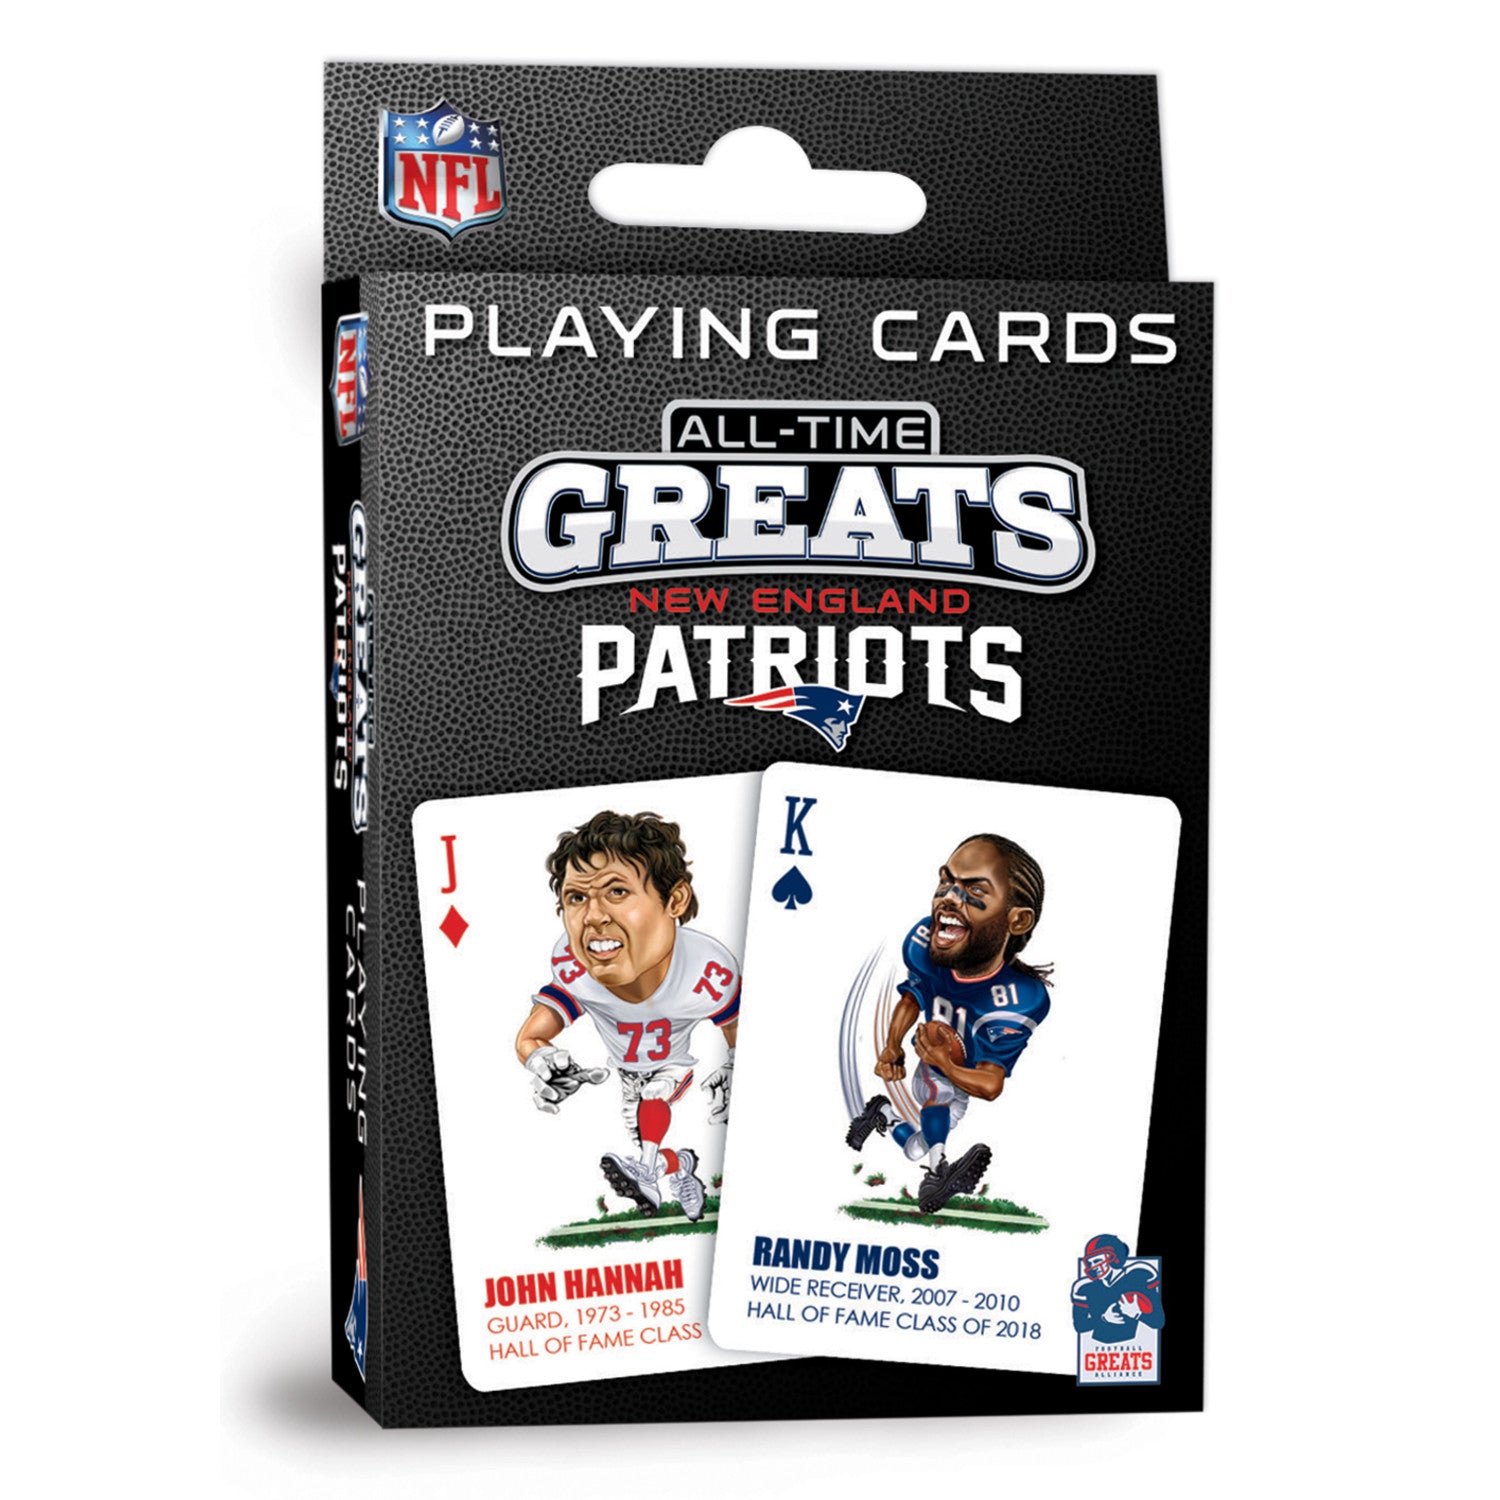 New England Patriots All-Time Greats Playing Cards - 54 Card Deck